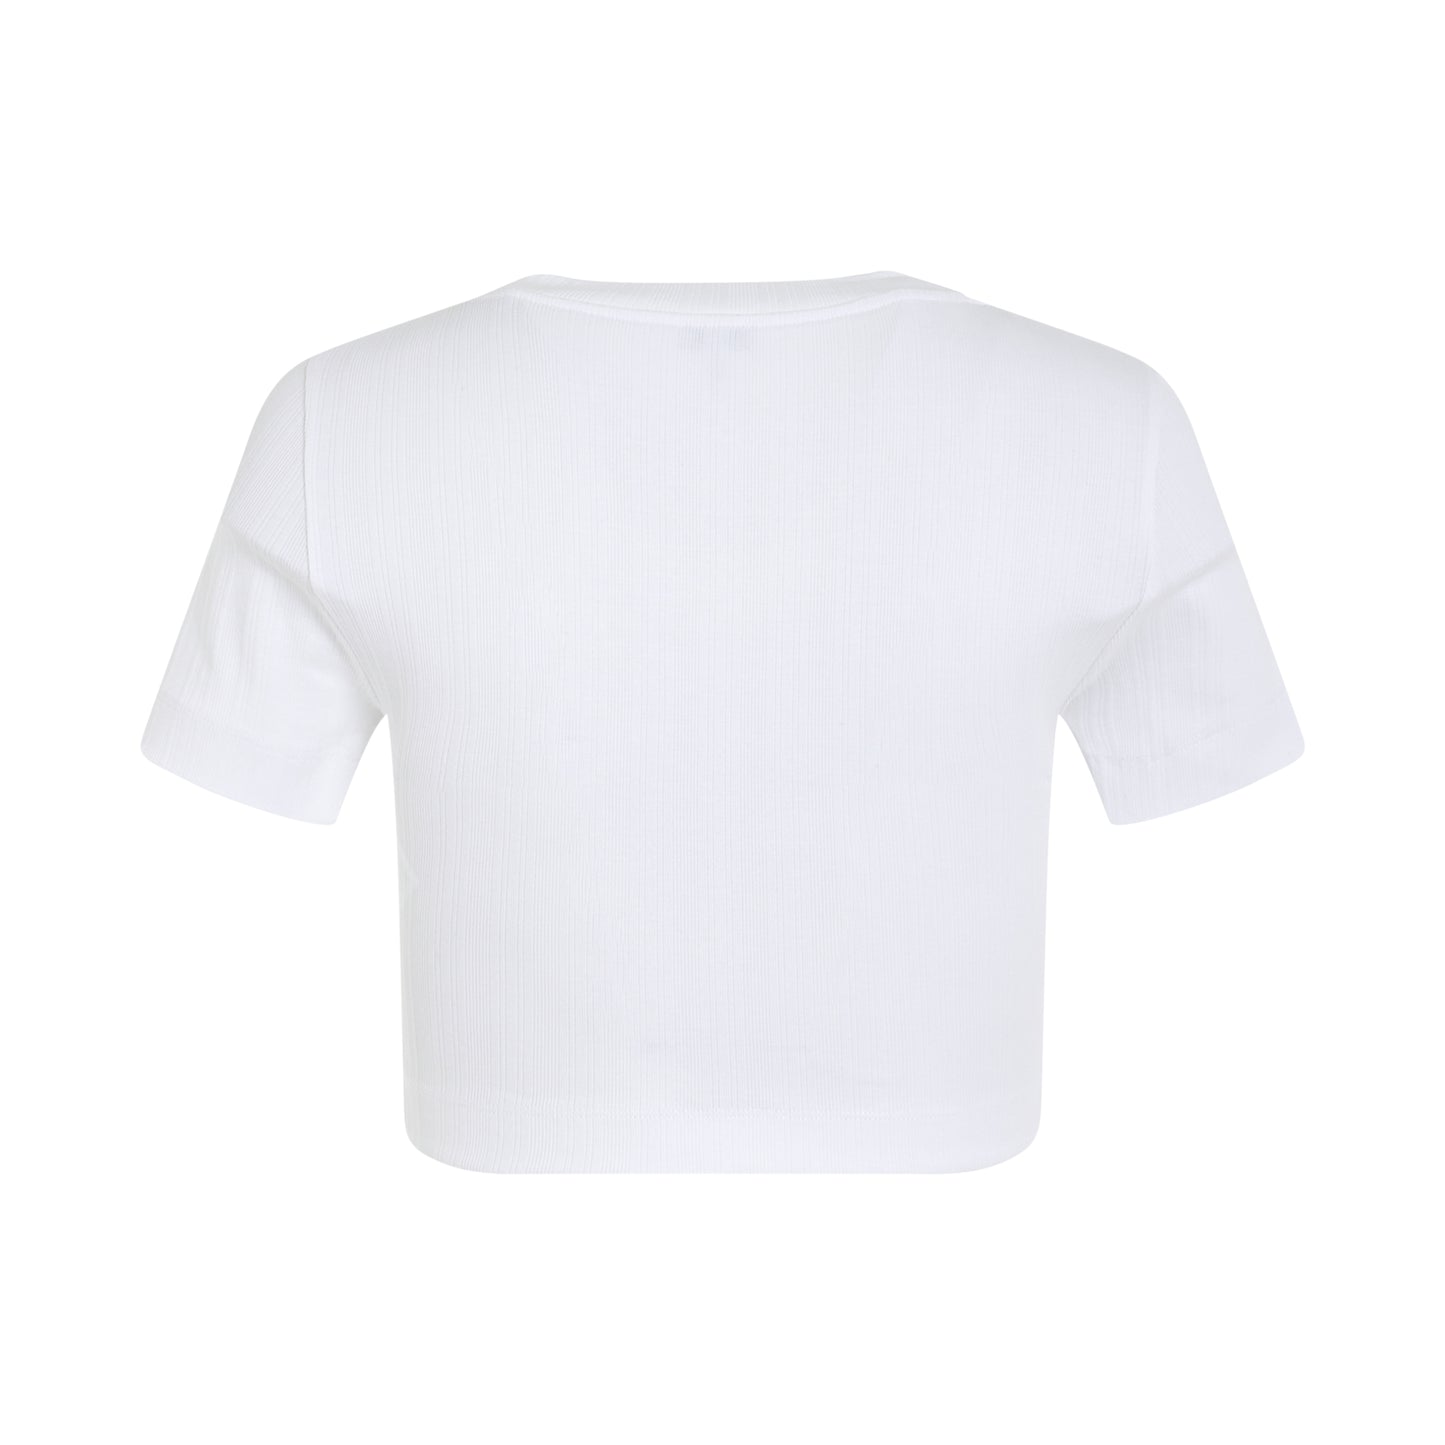 Cropped Anagram Top in White